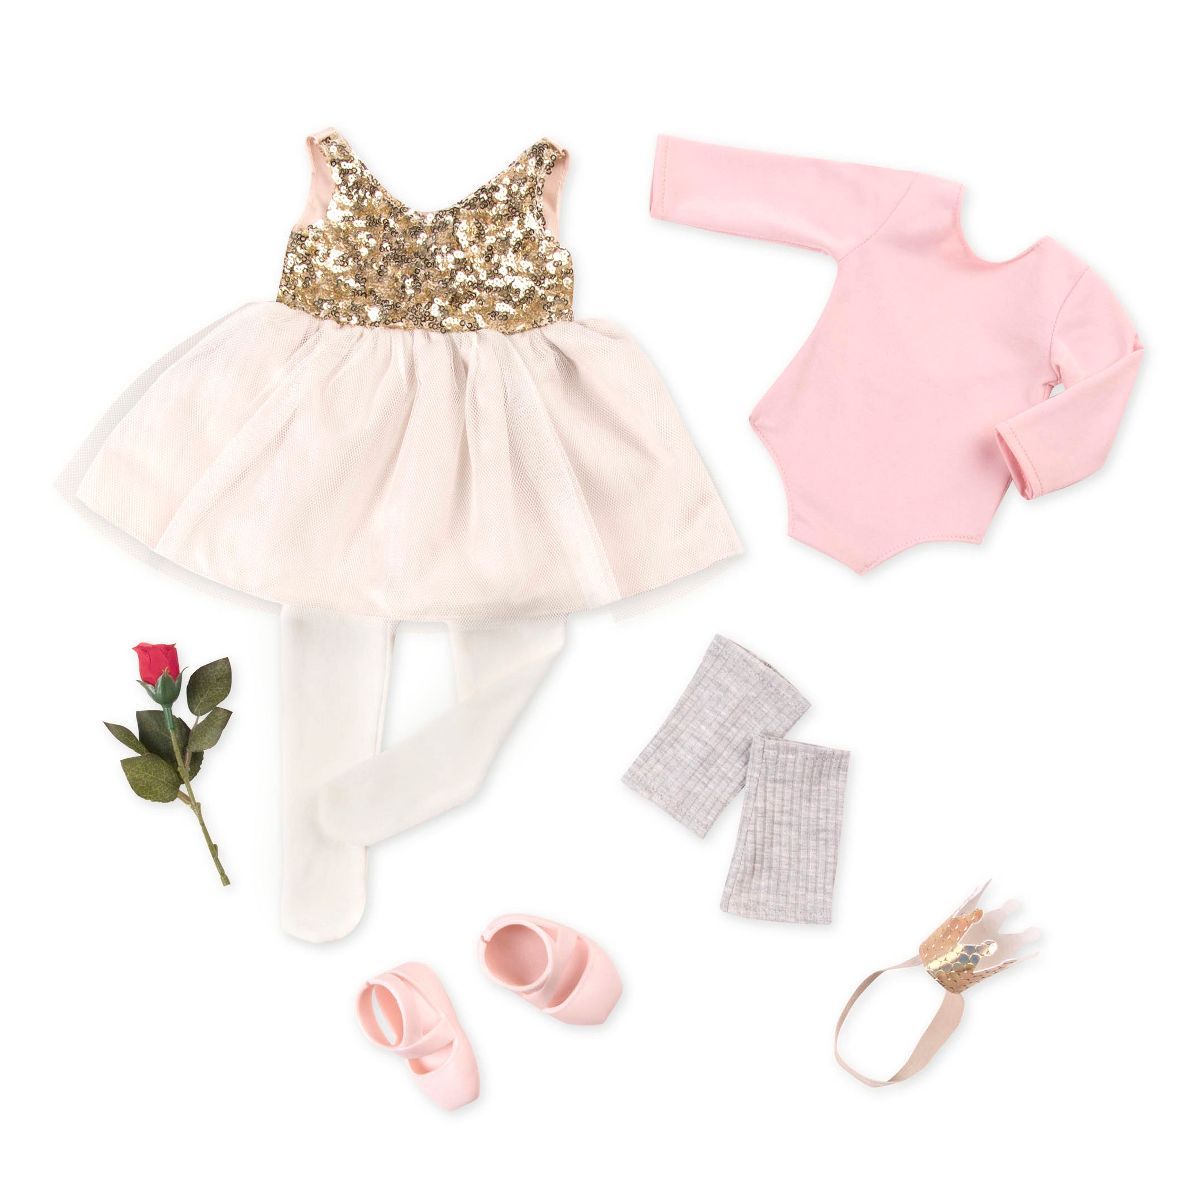 Our Generation Opening Night Ballet Outfit for 18" Dolls | Target